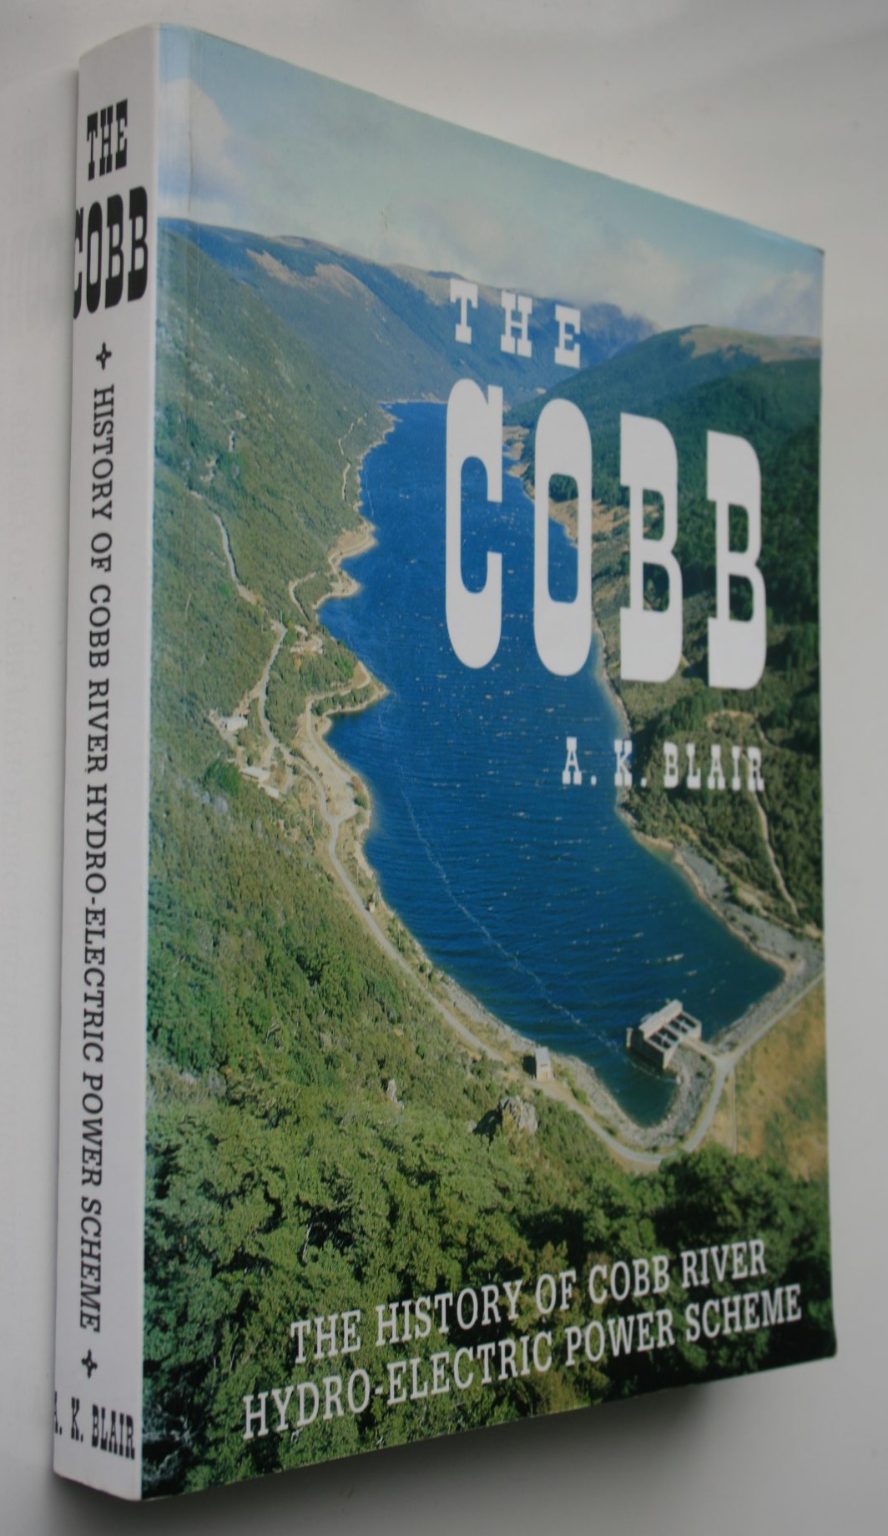 The COBB - The History of Cobb River Hydro-Electric Power Scheme. SIGNED BY AUTHOR: A. K. Blair.